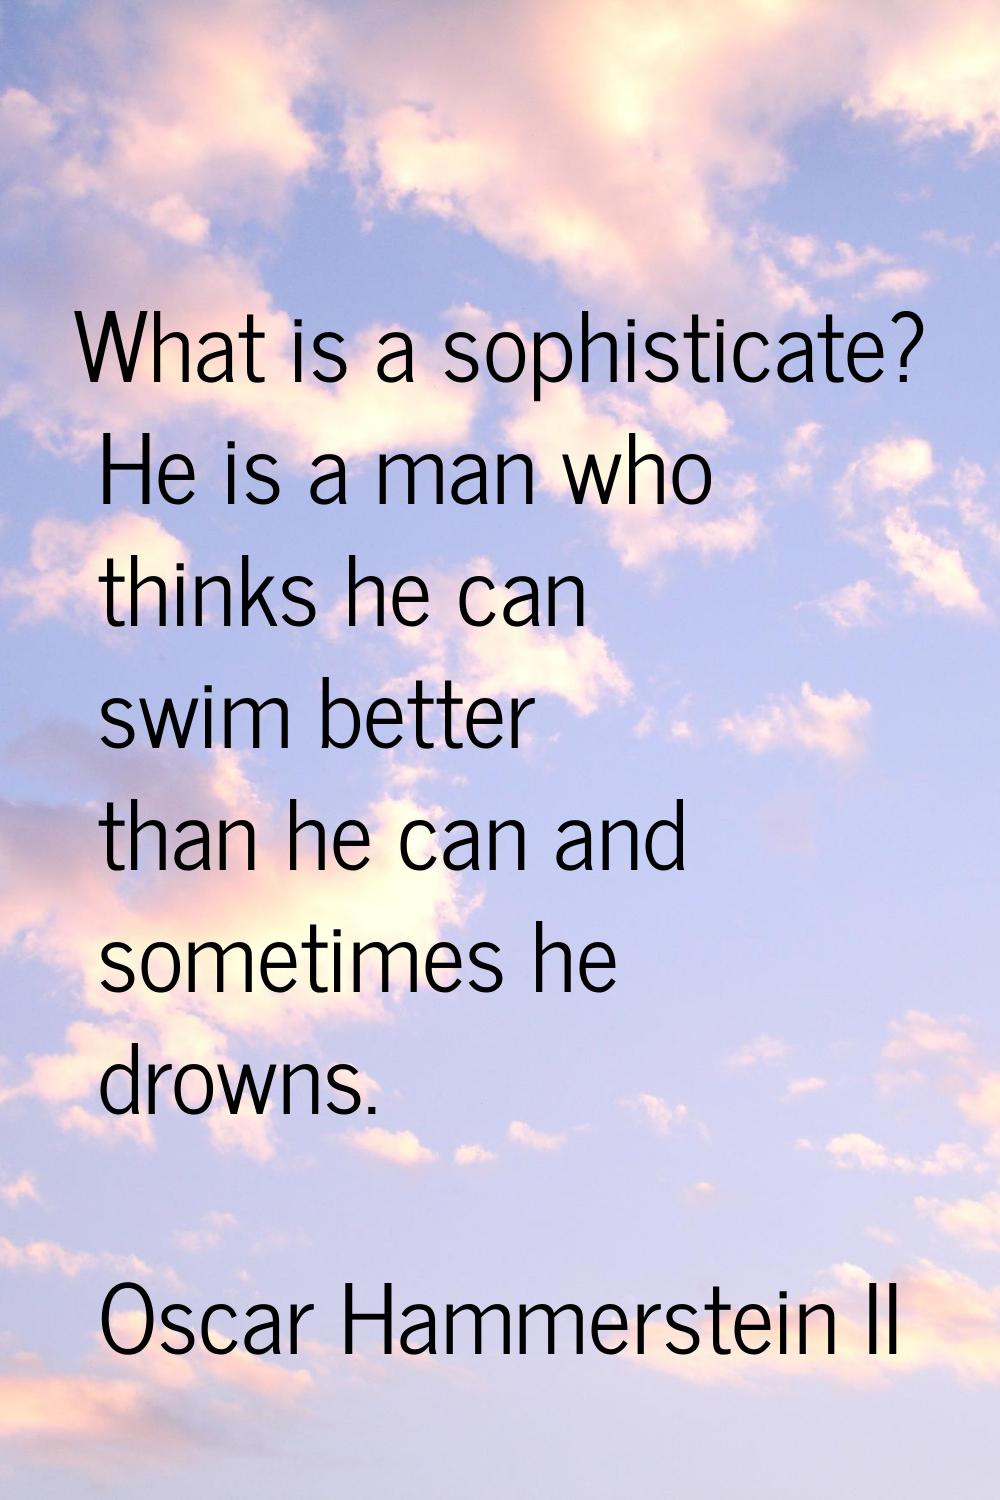 What is a sophisticate? He is a man who thinks he can swim better than he can and sometimes he drow